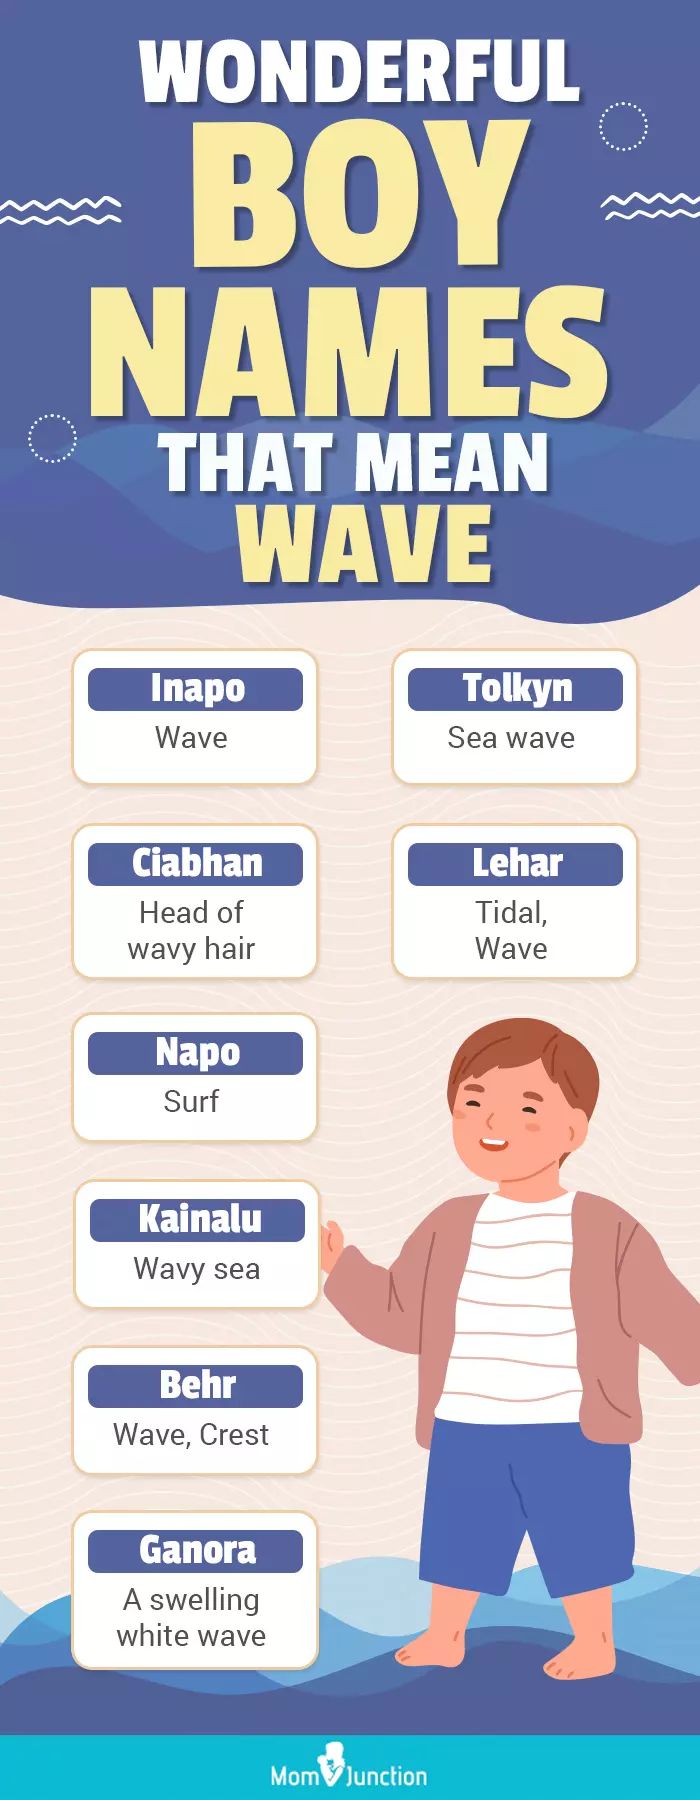 Wonderful Boy Names That Mean Wave (infographic)